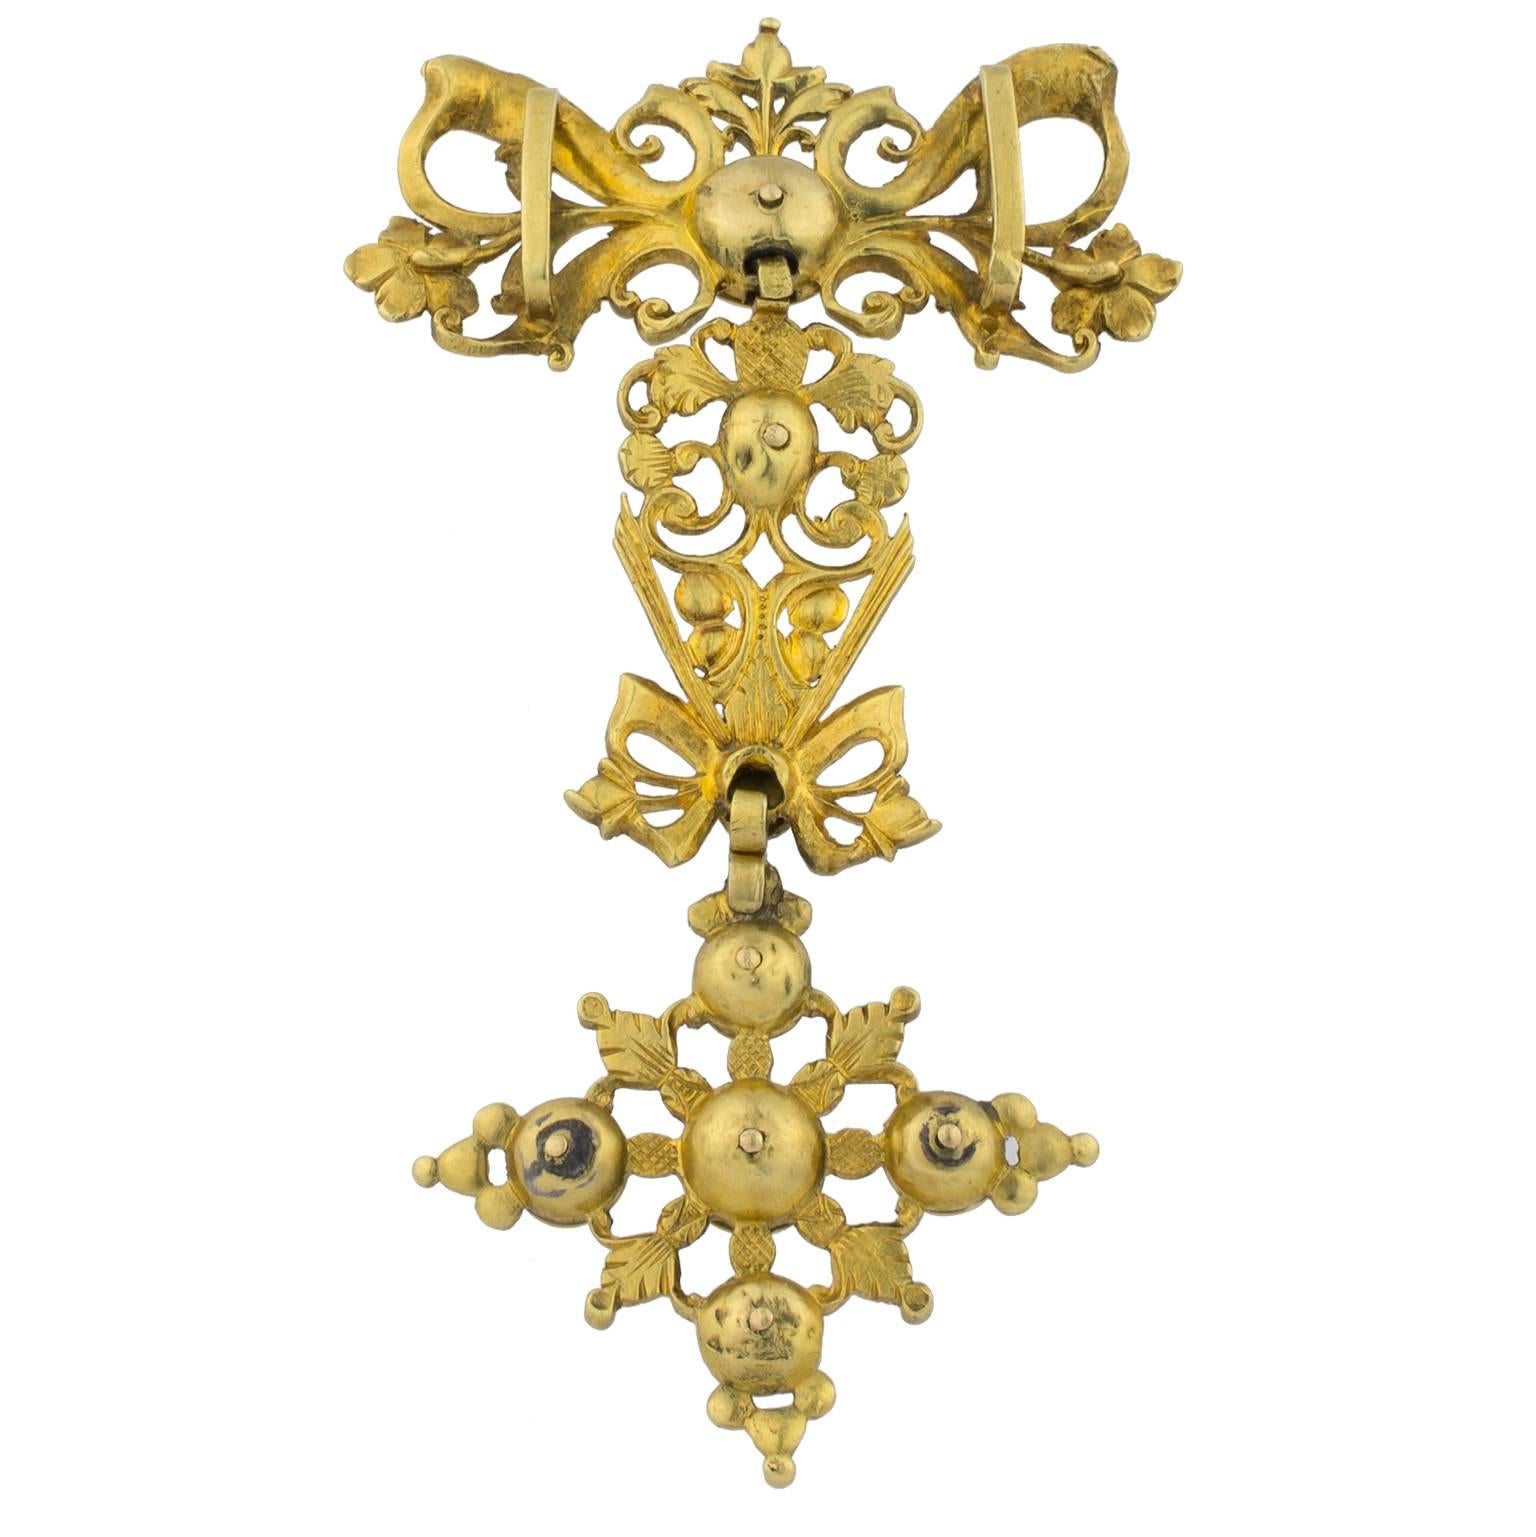 18th century Spanish pendant in gold, divided in three segments set with diamonds.
Length: 8 cm (3.15 in)
Width: 44 mm (1.73 in)